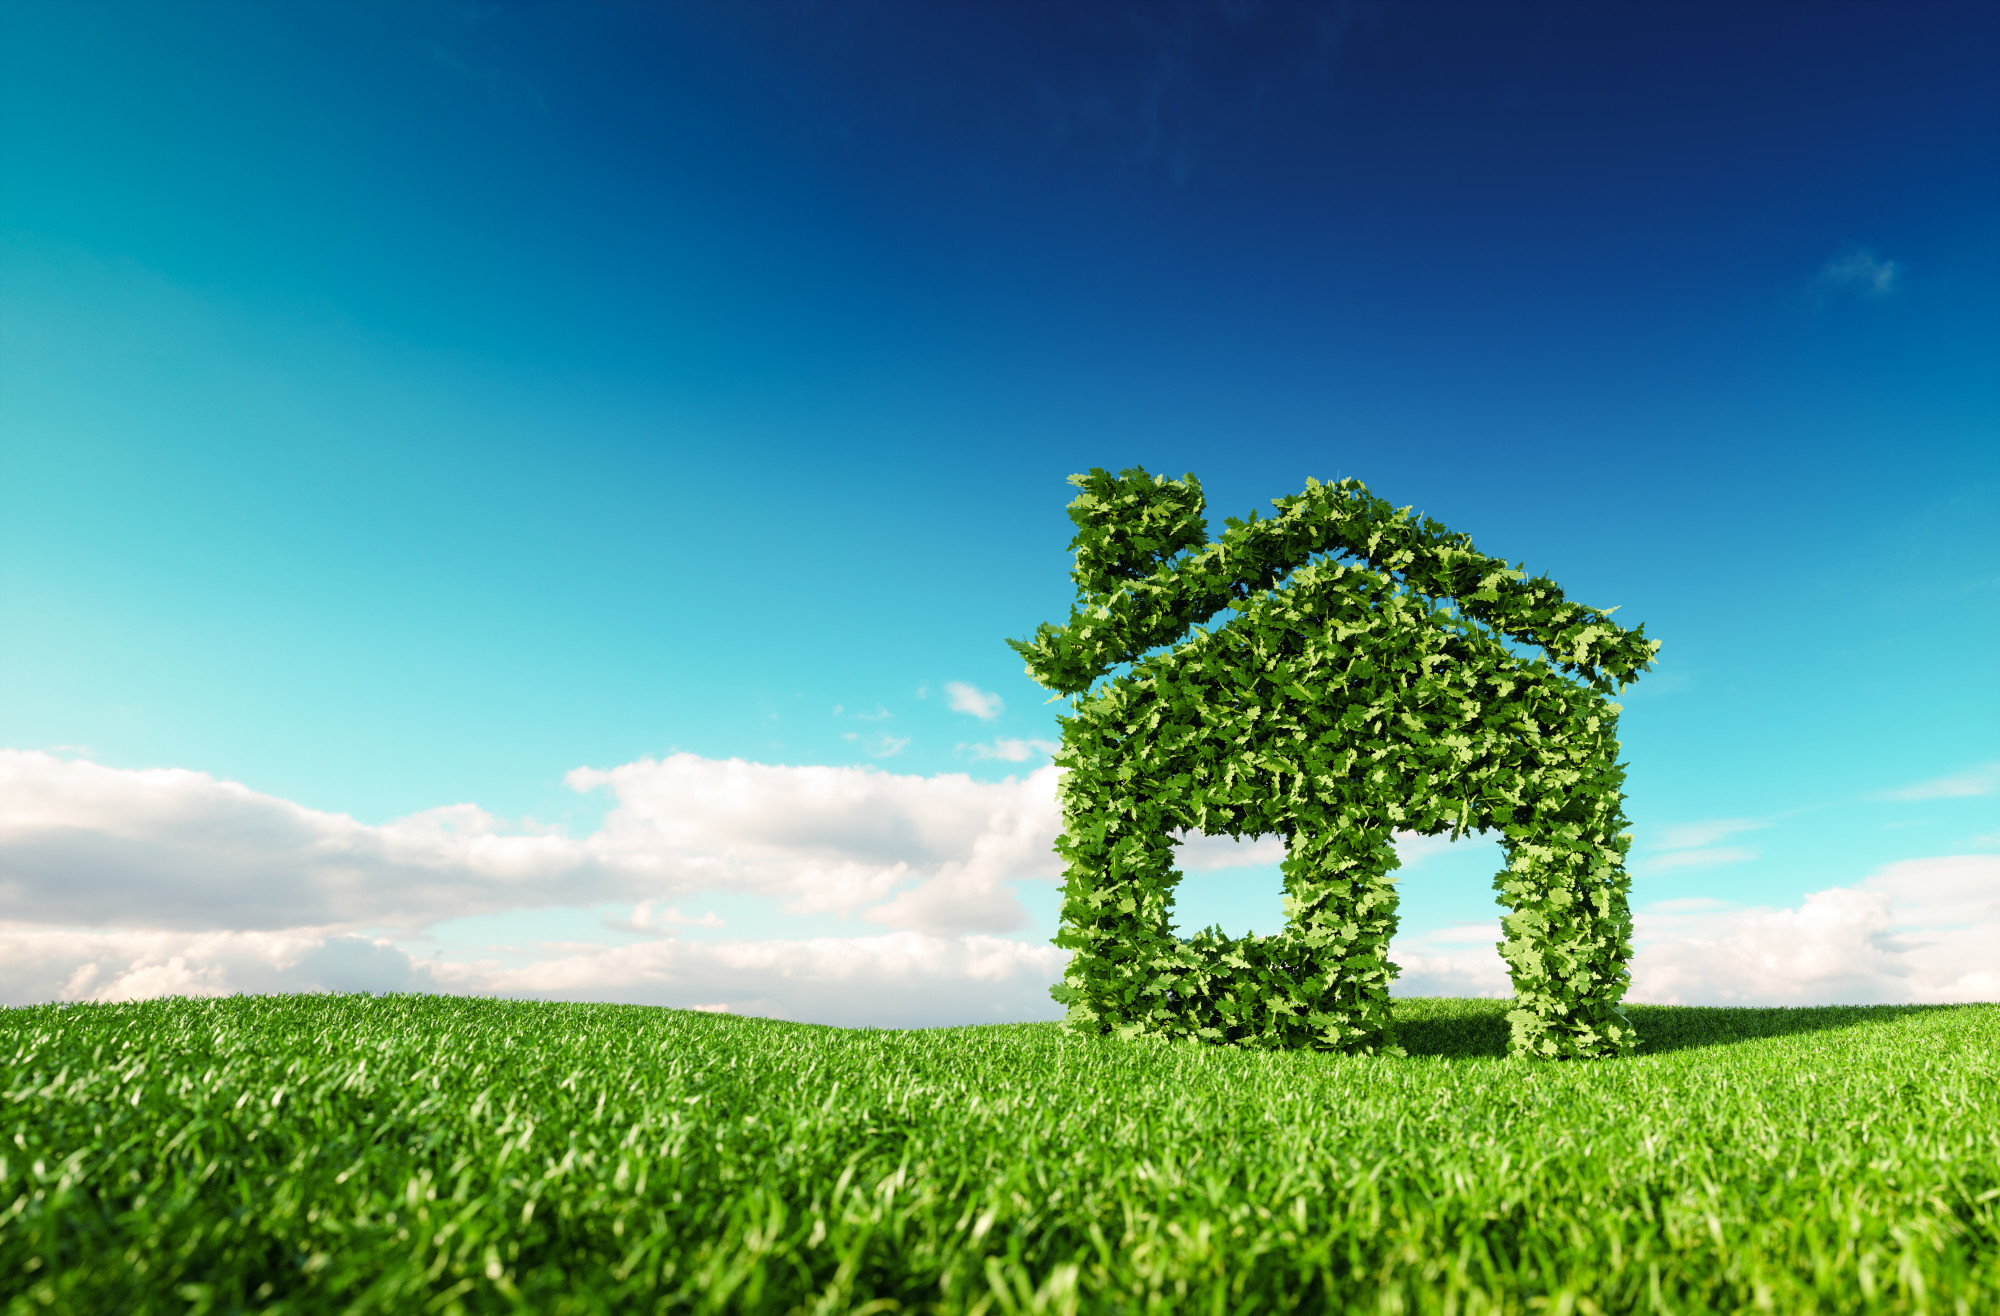 How To Turn A Home Into An Environmentally Friendly House Nuenergy